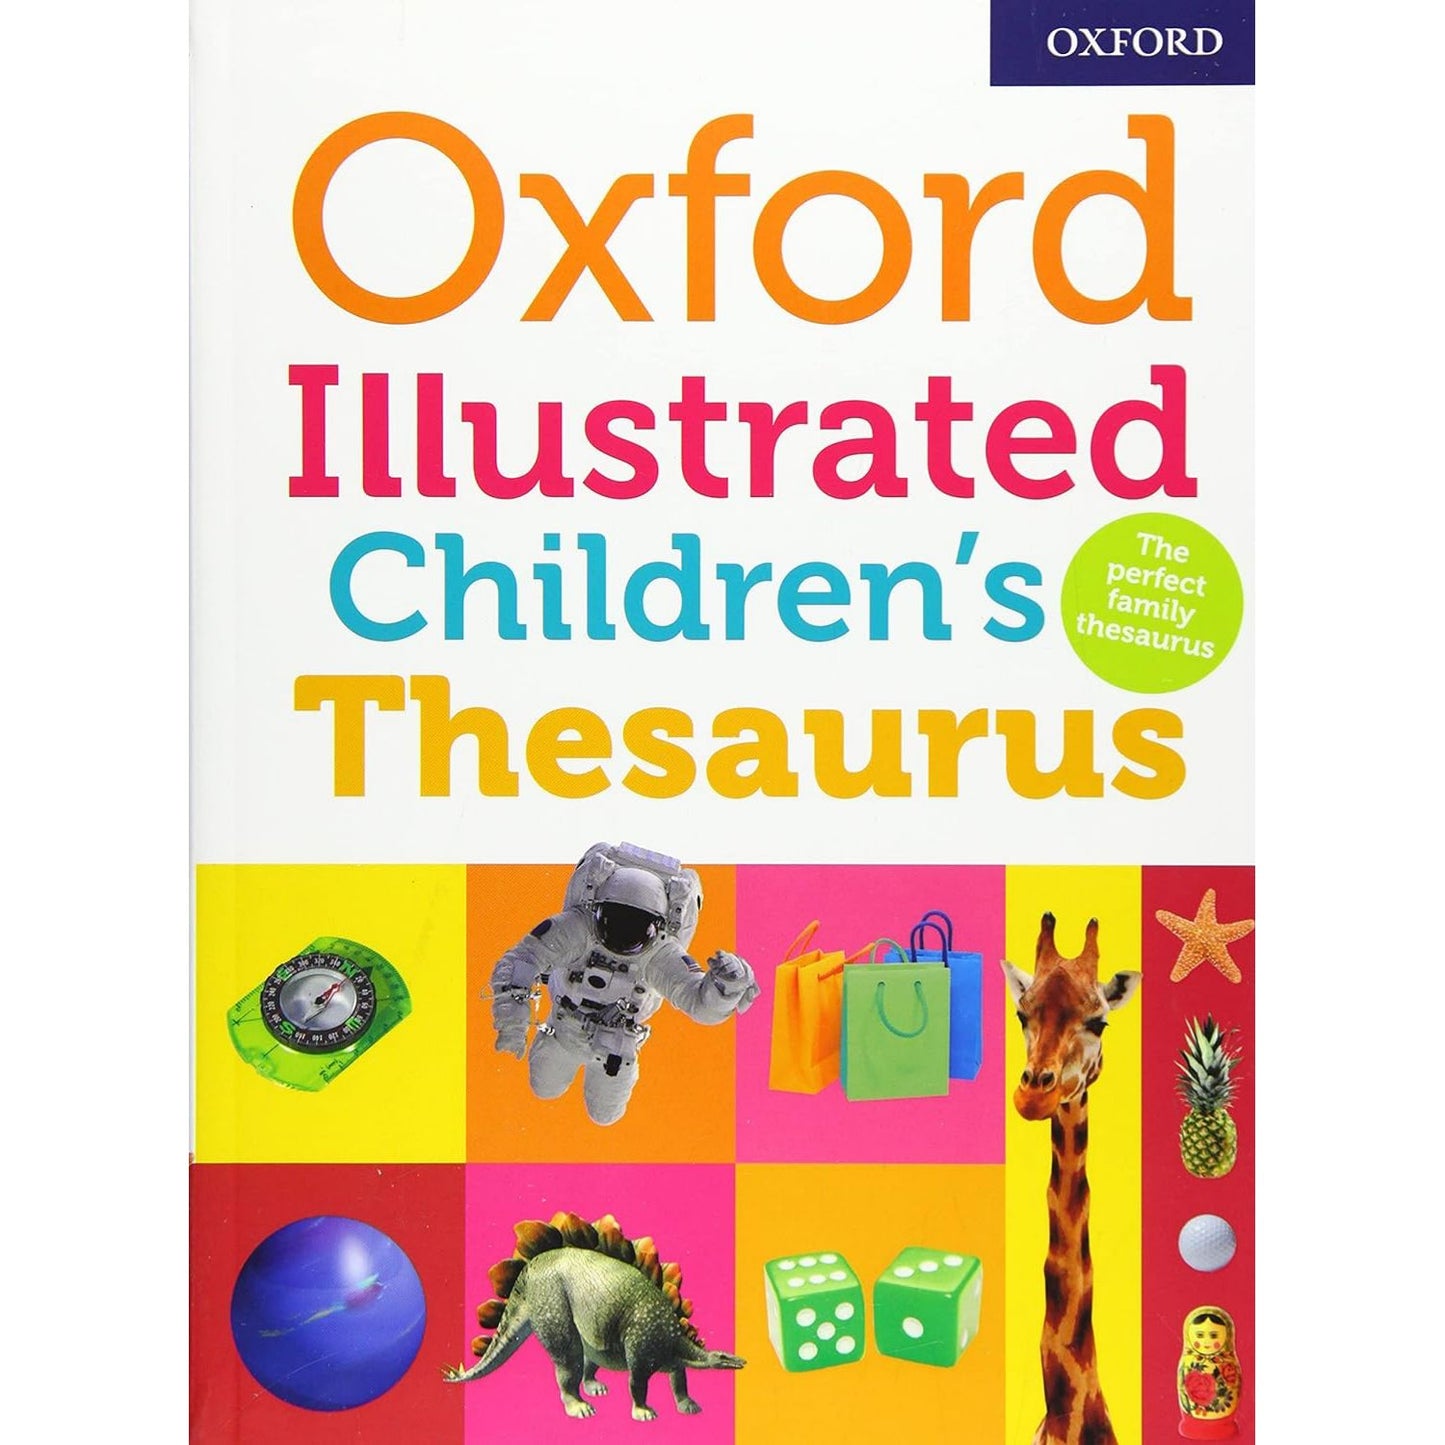 Oxford Illustrated Children's Thesaurus | Paperback | Dictionaries & Thesauri for Kids